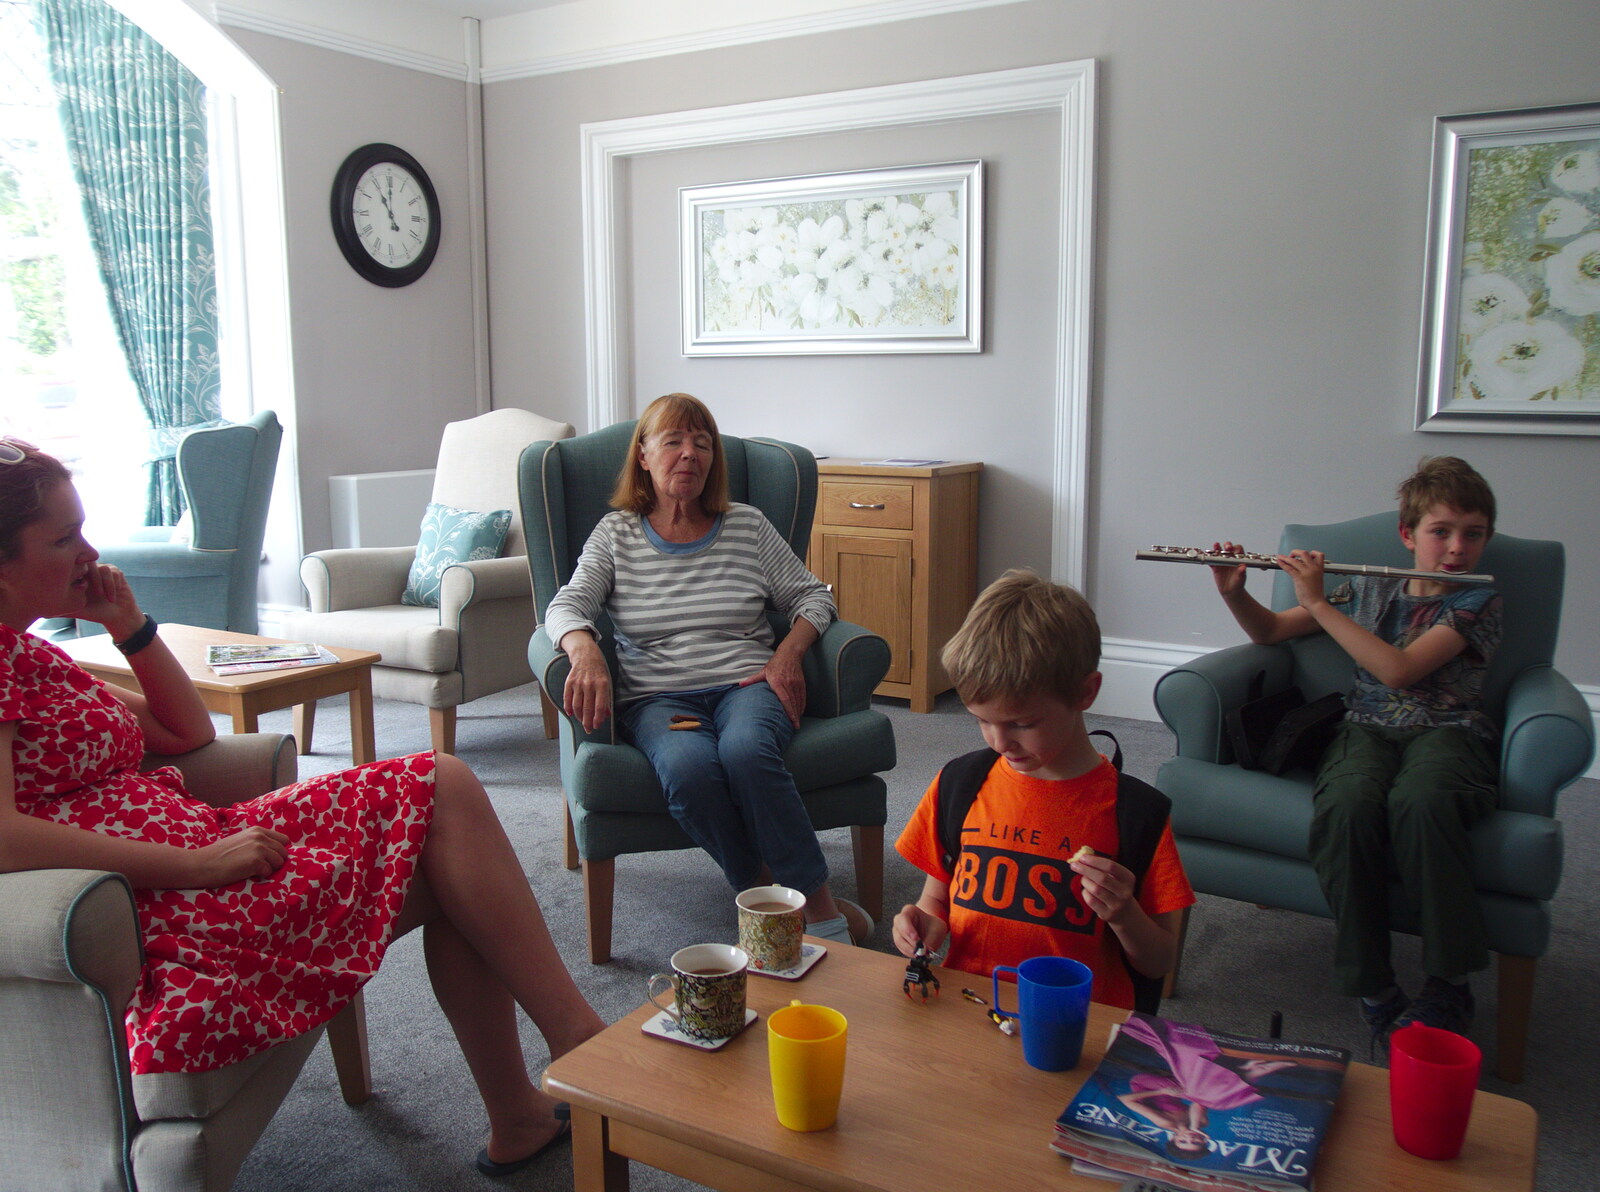 Fred plays some flute for Grandma J from Chagford Lido and a Trip to Parke, Bovey Tracey, Devon - 25th May 2019